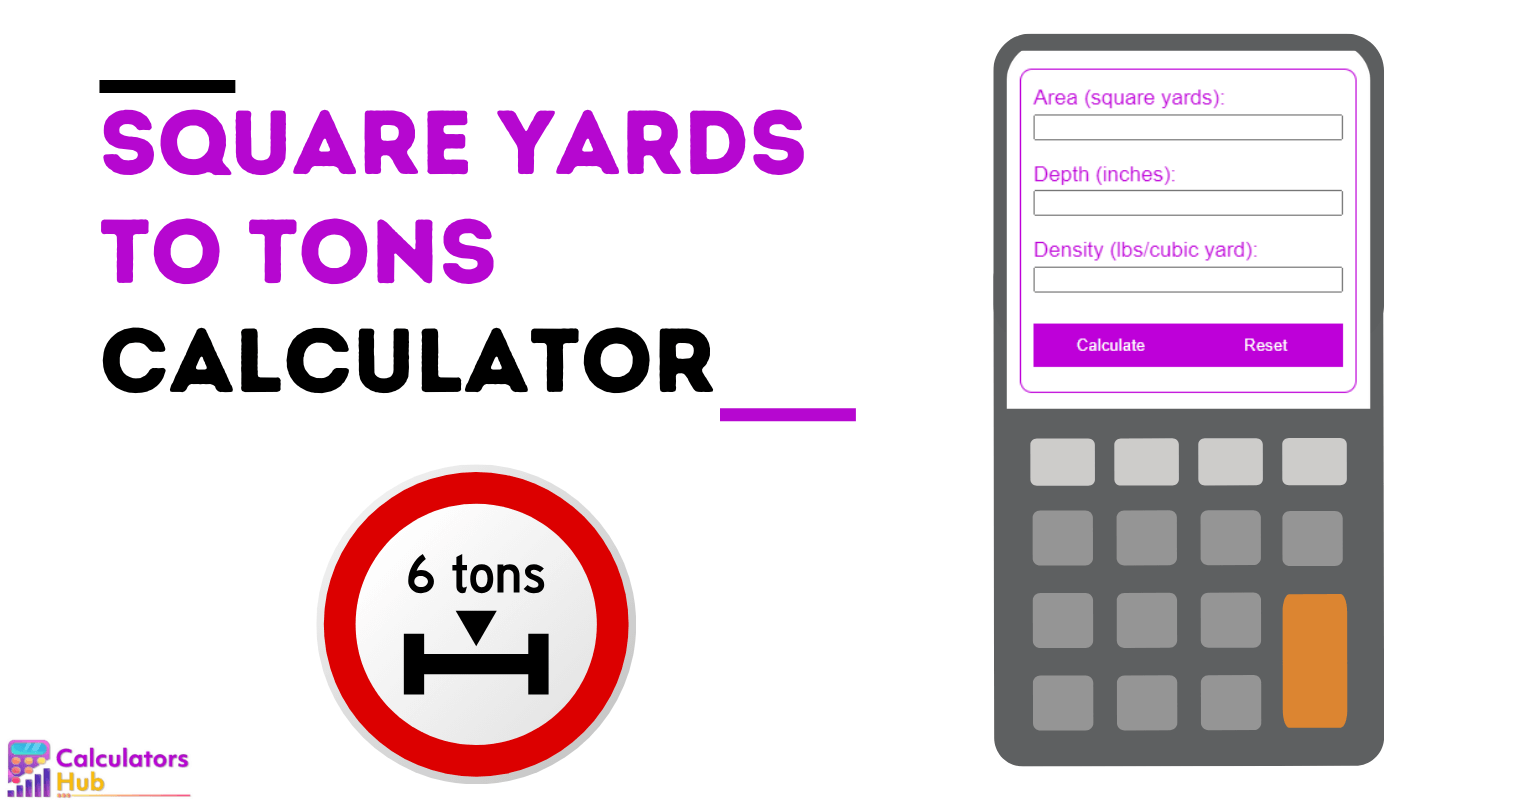 Square Yards to Tons Calculator